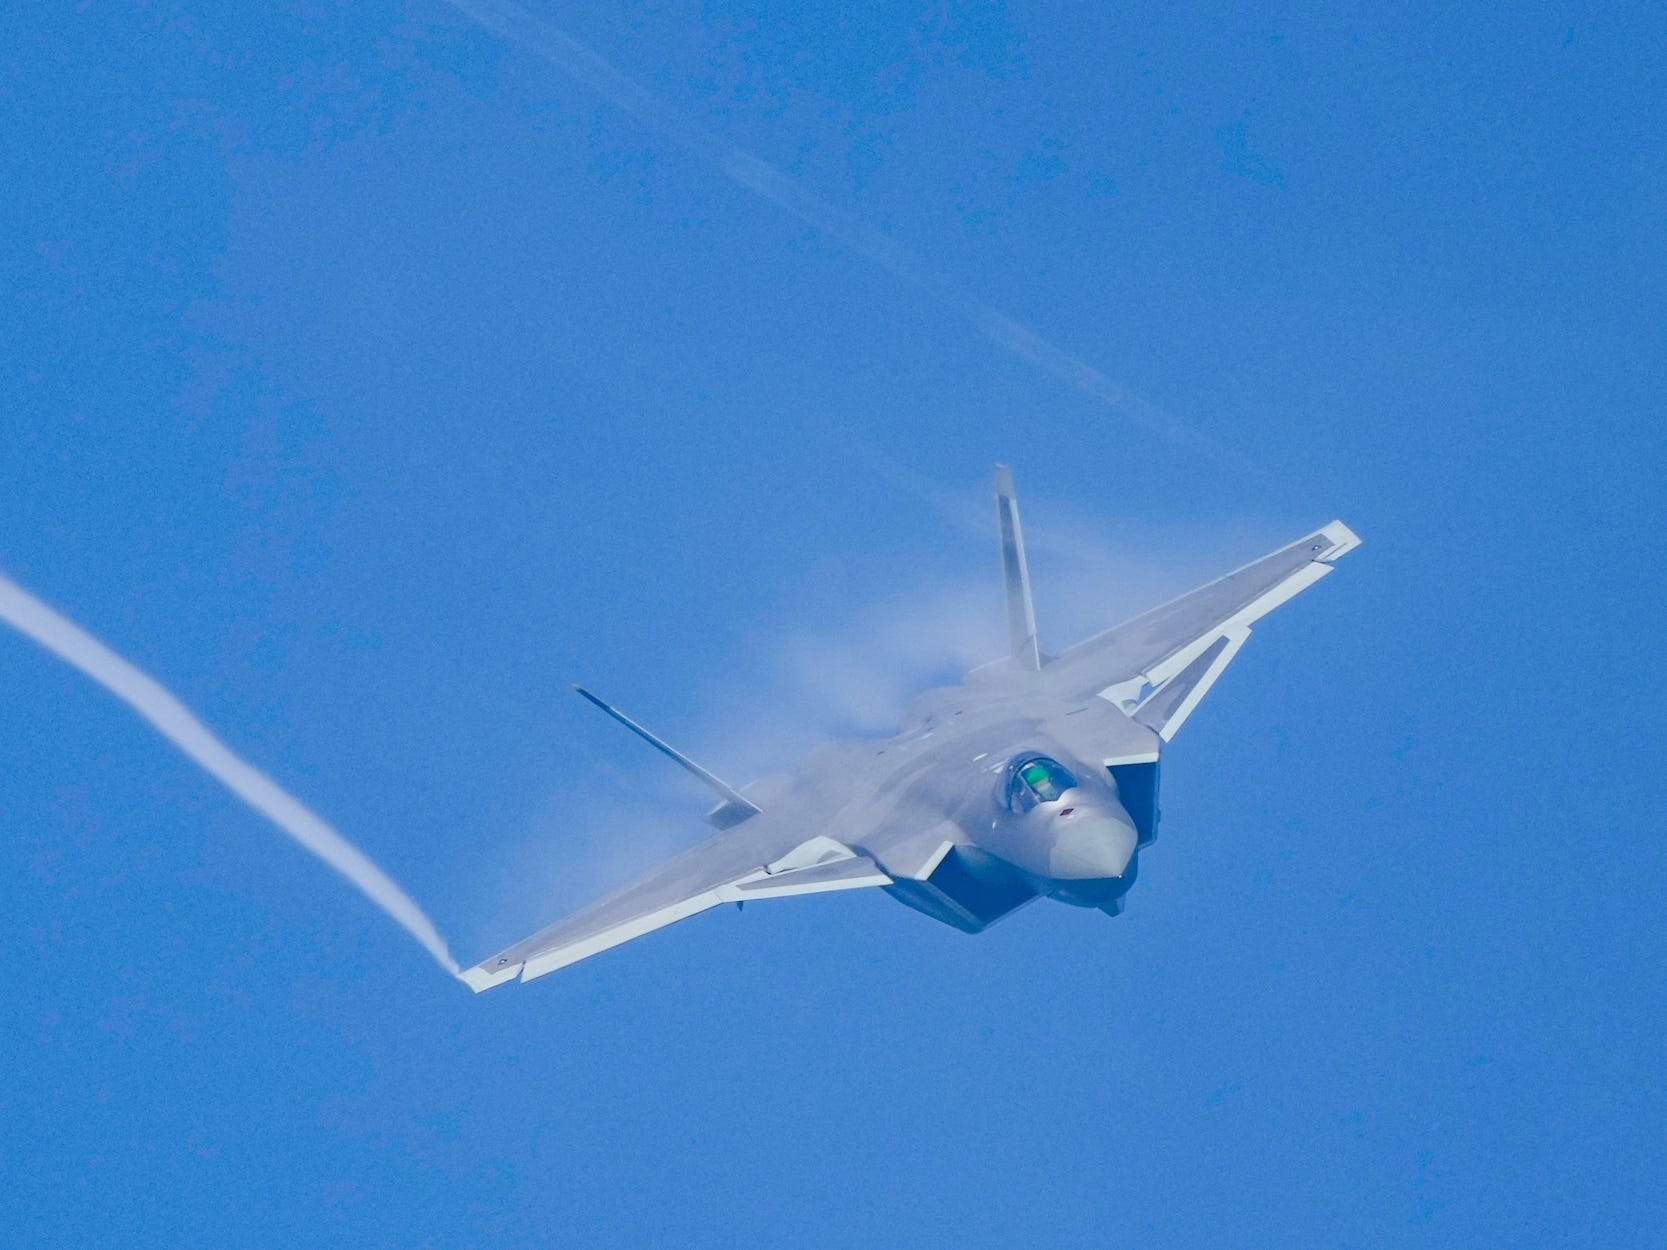 A US ally is forging ties with China's air force but probably won't get its J-20 stealth fighter